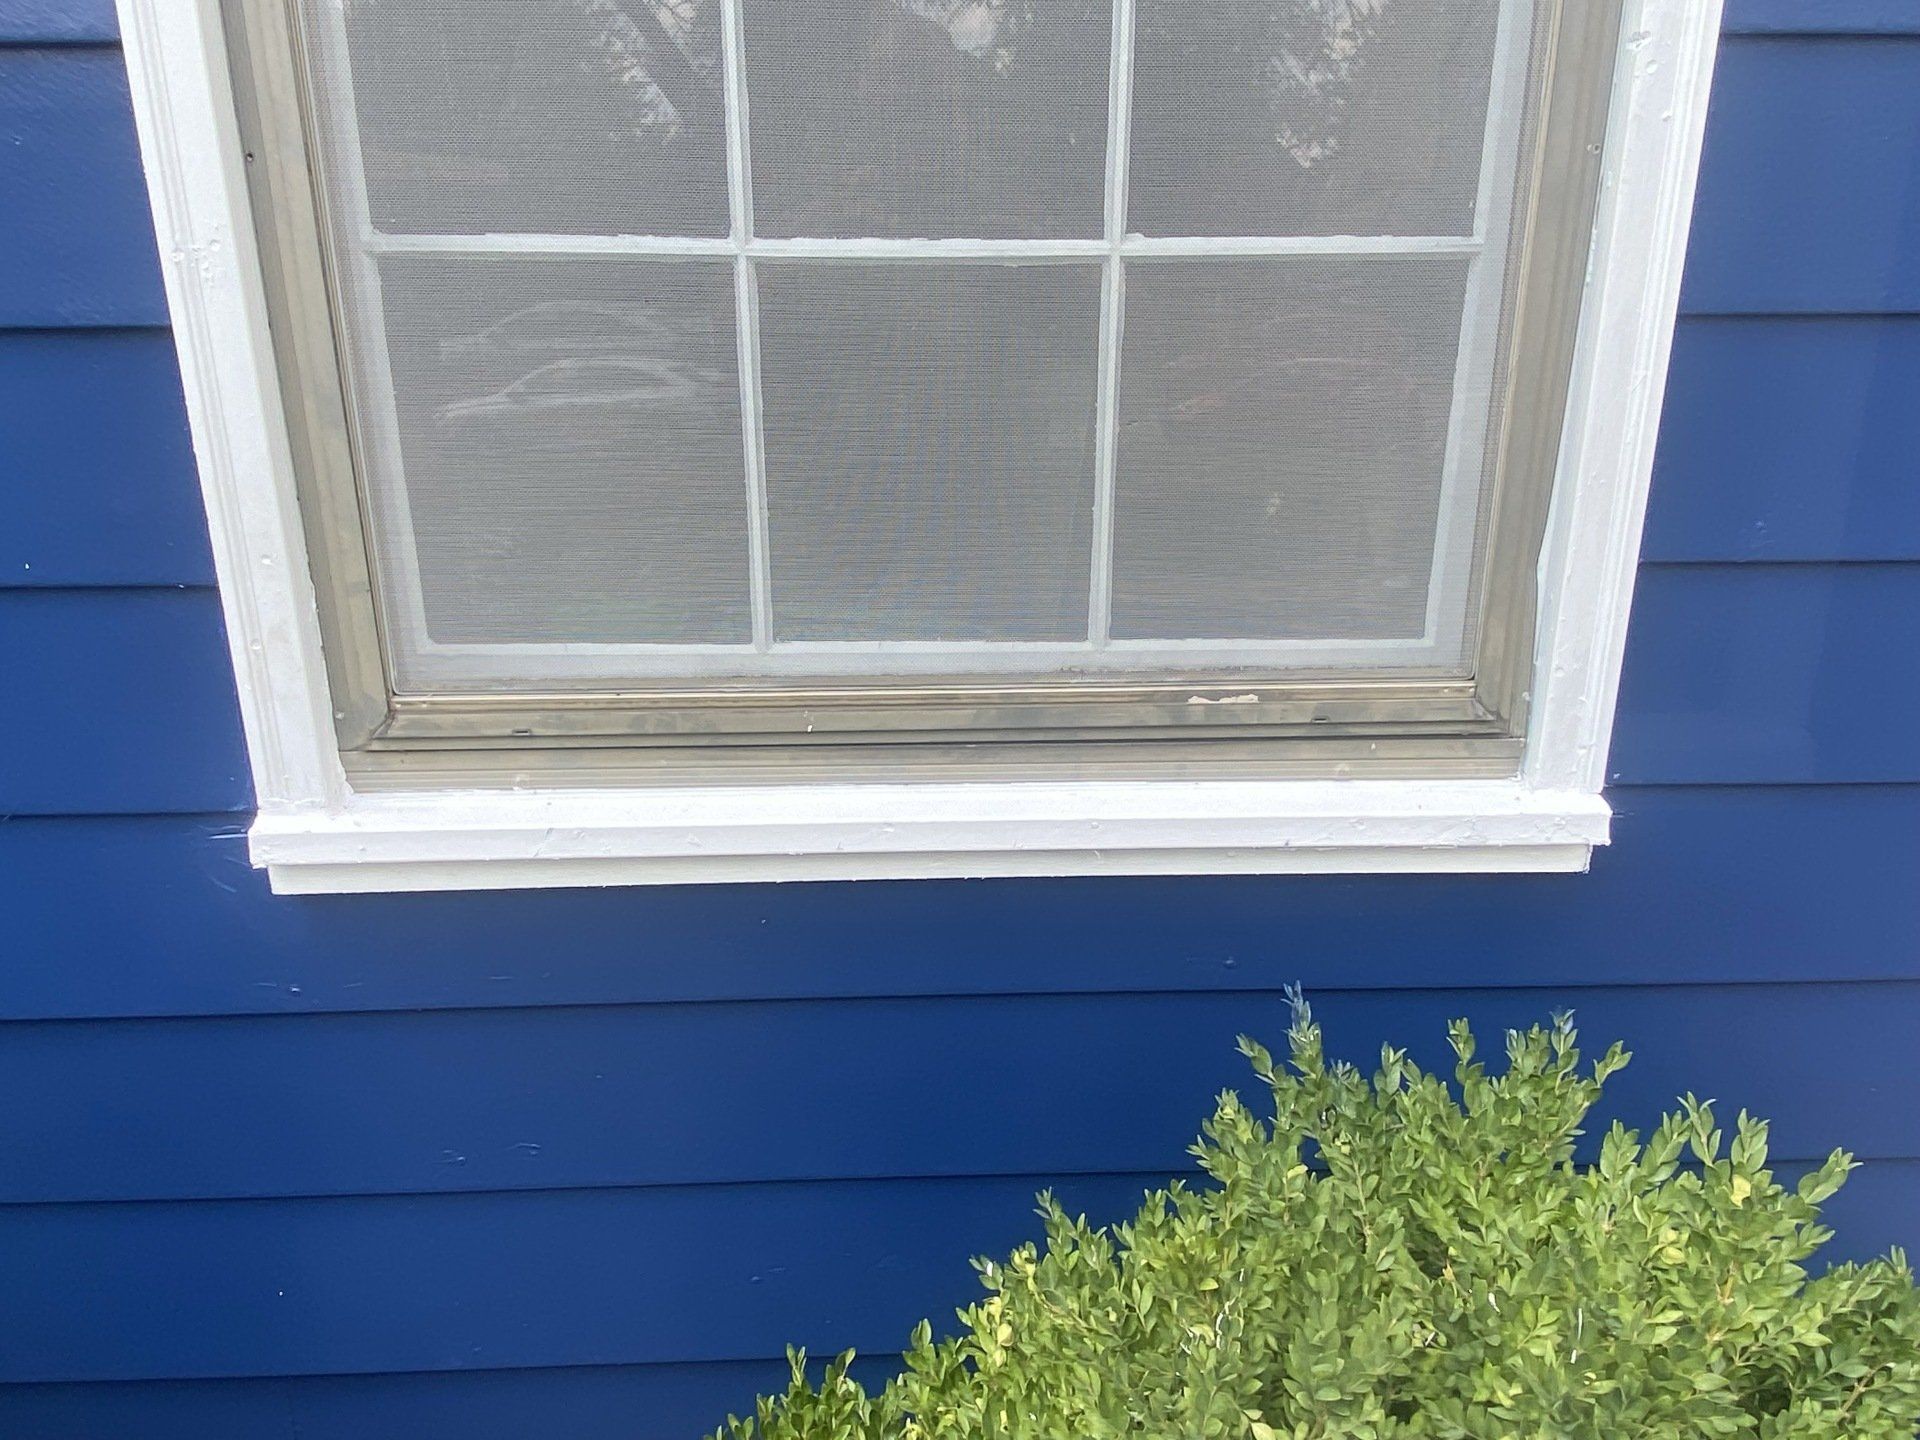 Blue & White Window After Wood Rot Fixed